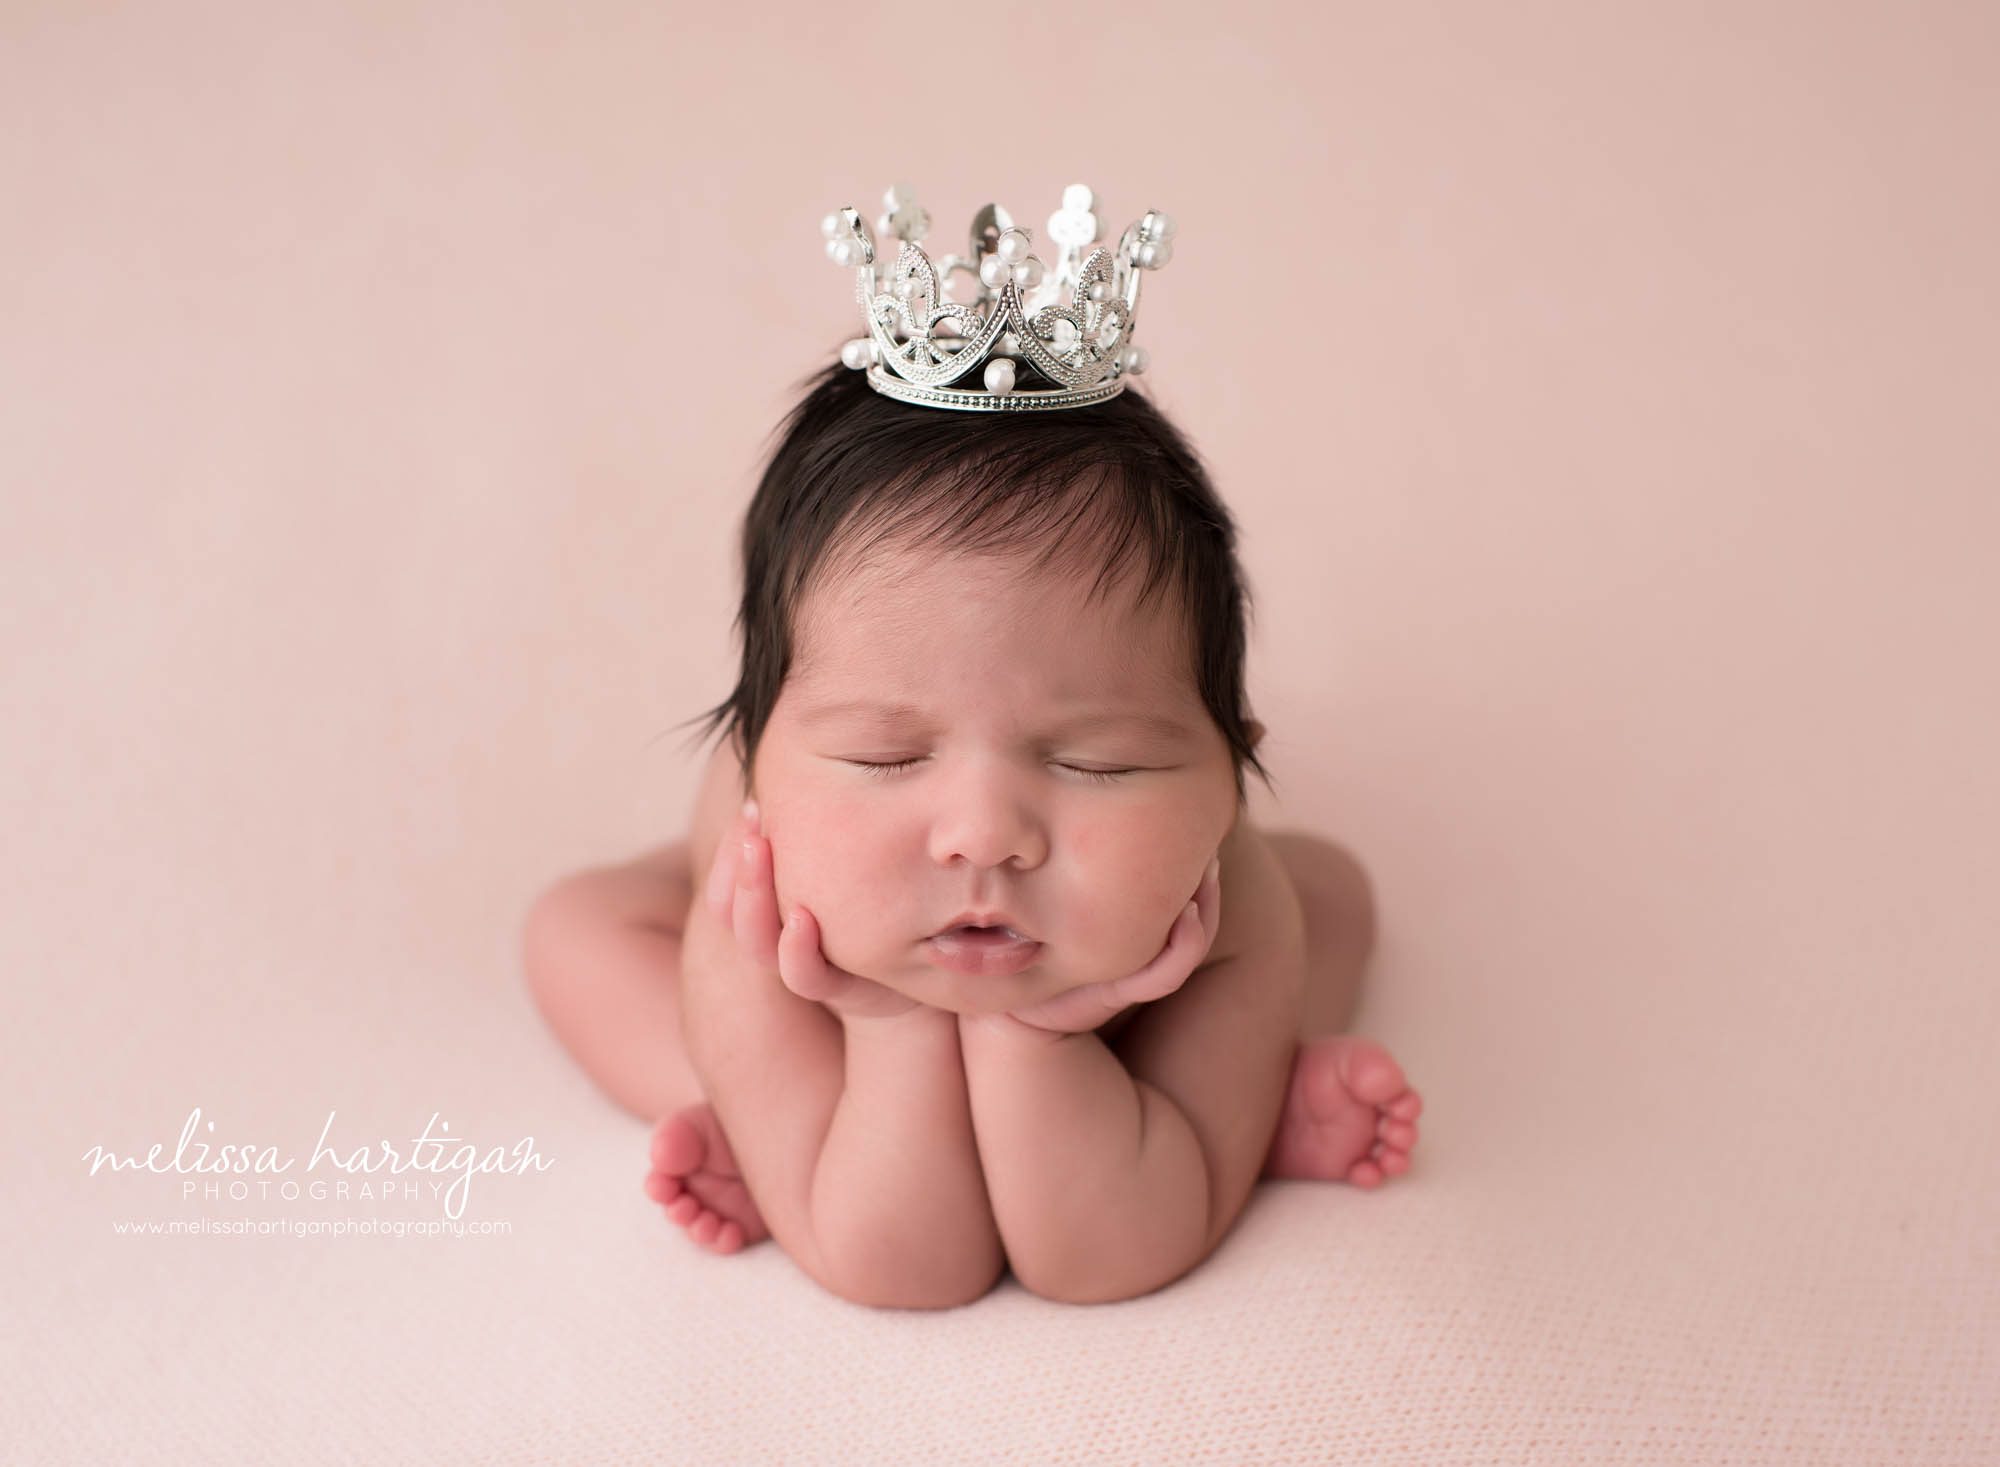 newborn baby girl posed on pink backdrop in froggy pose wearing crown